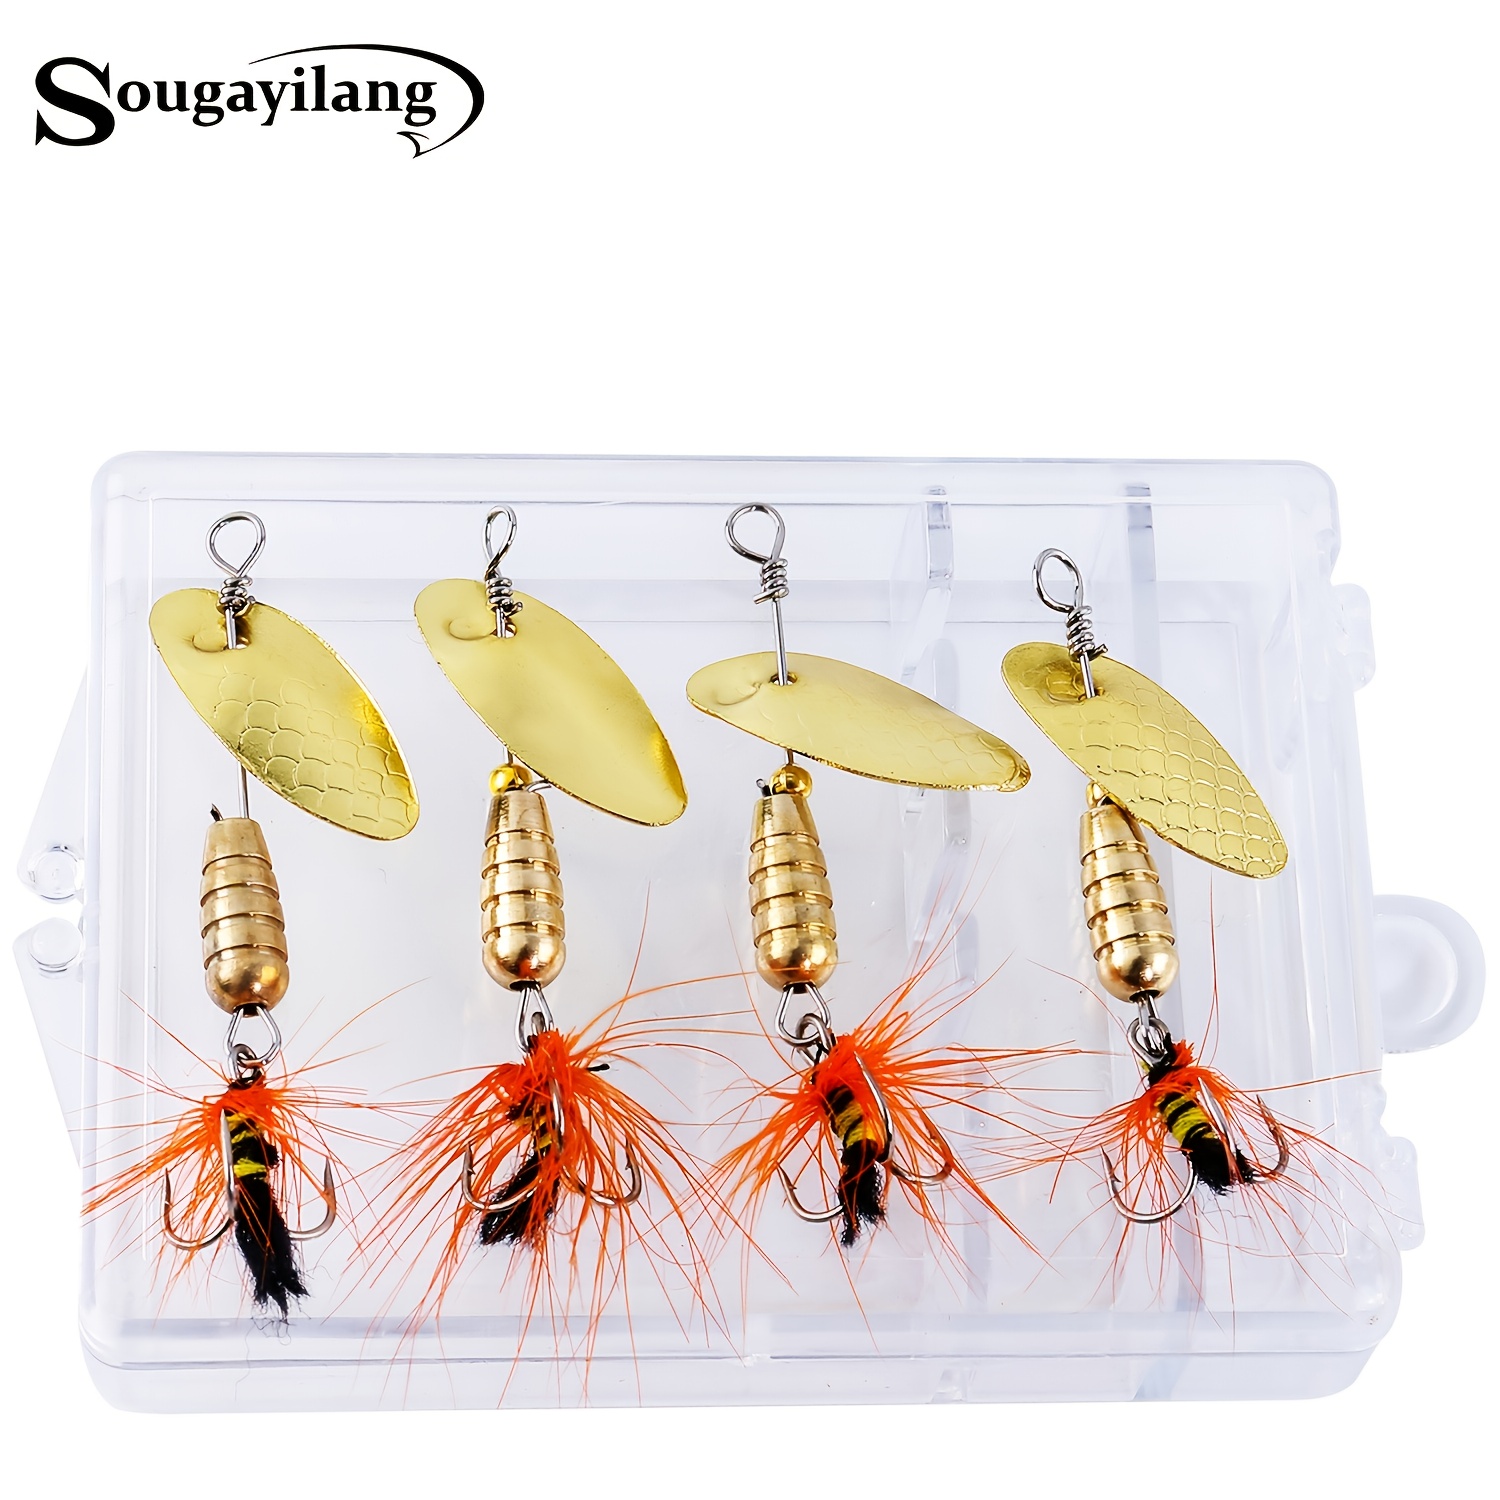 Fishing Spinners 4pcs Hard Metal Spinnerbaits Lures Kit For, 57% OFF